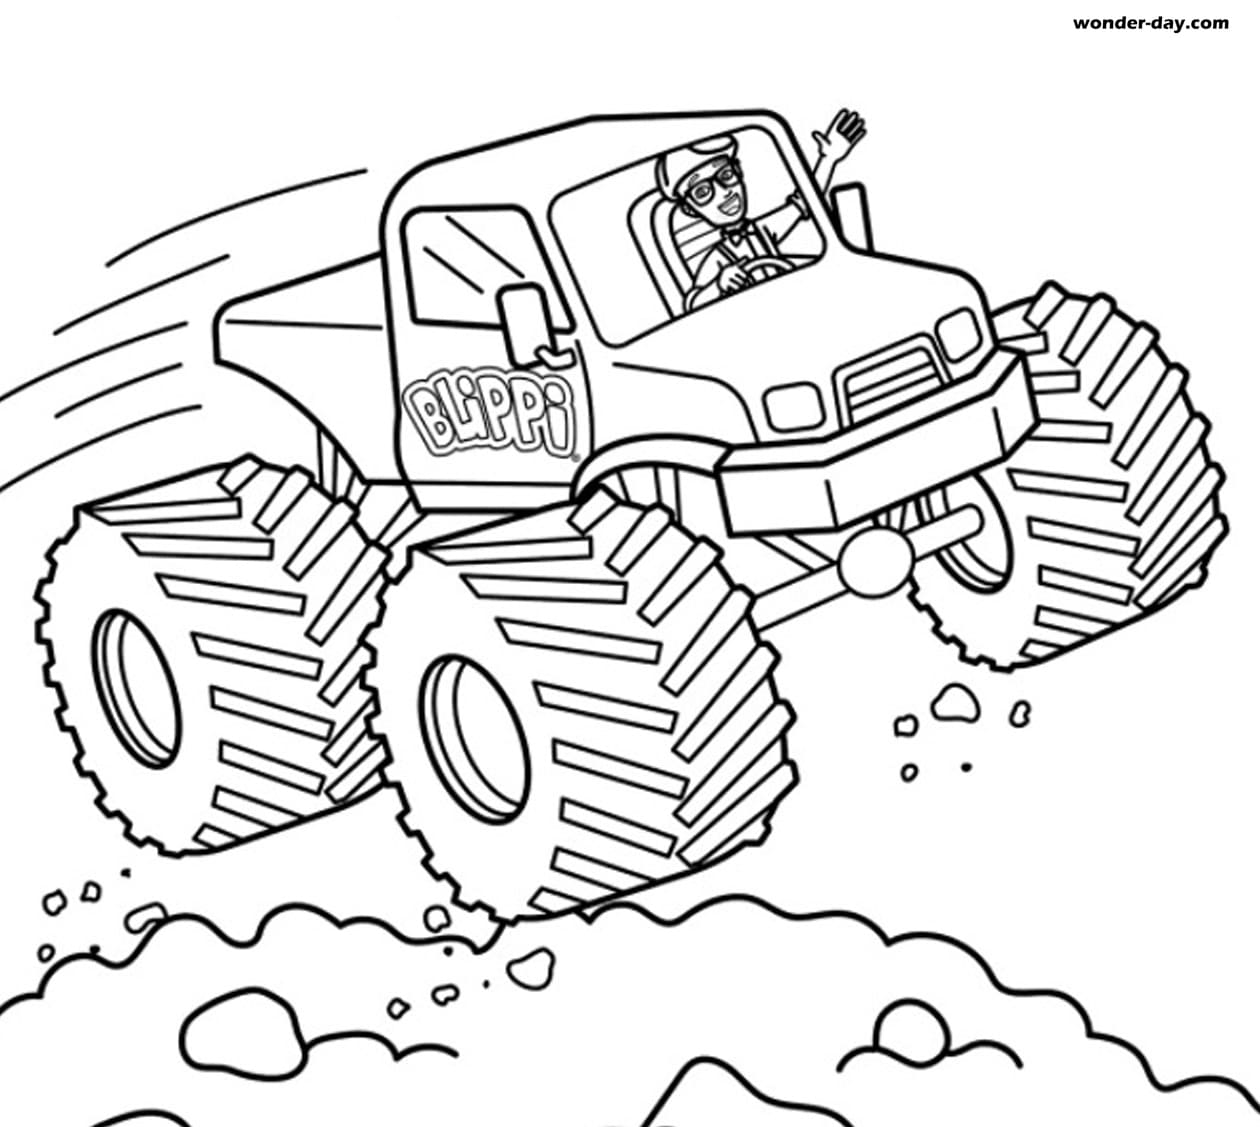 free-printable-blippi-coloring-pages-for-kids-wonder-day-coloring-pages-for-children-and-adults